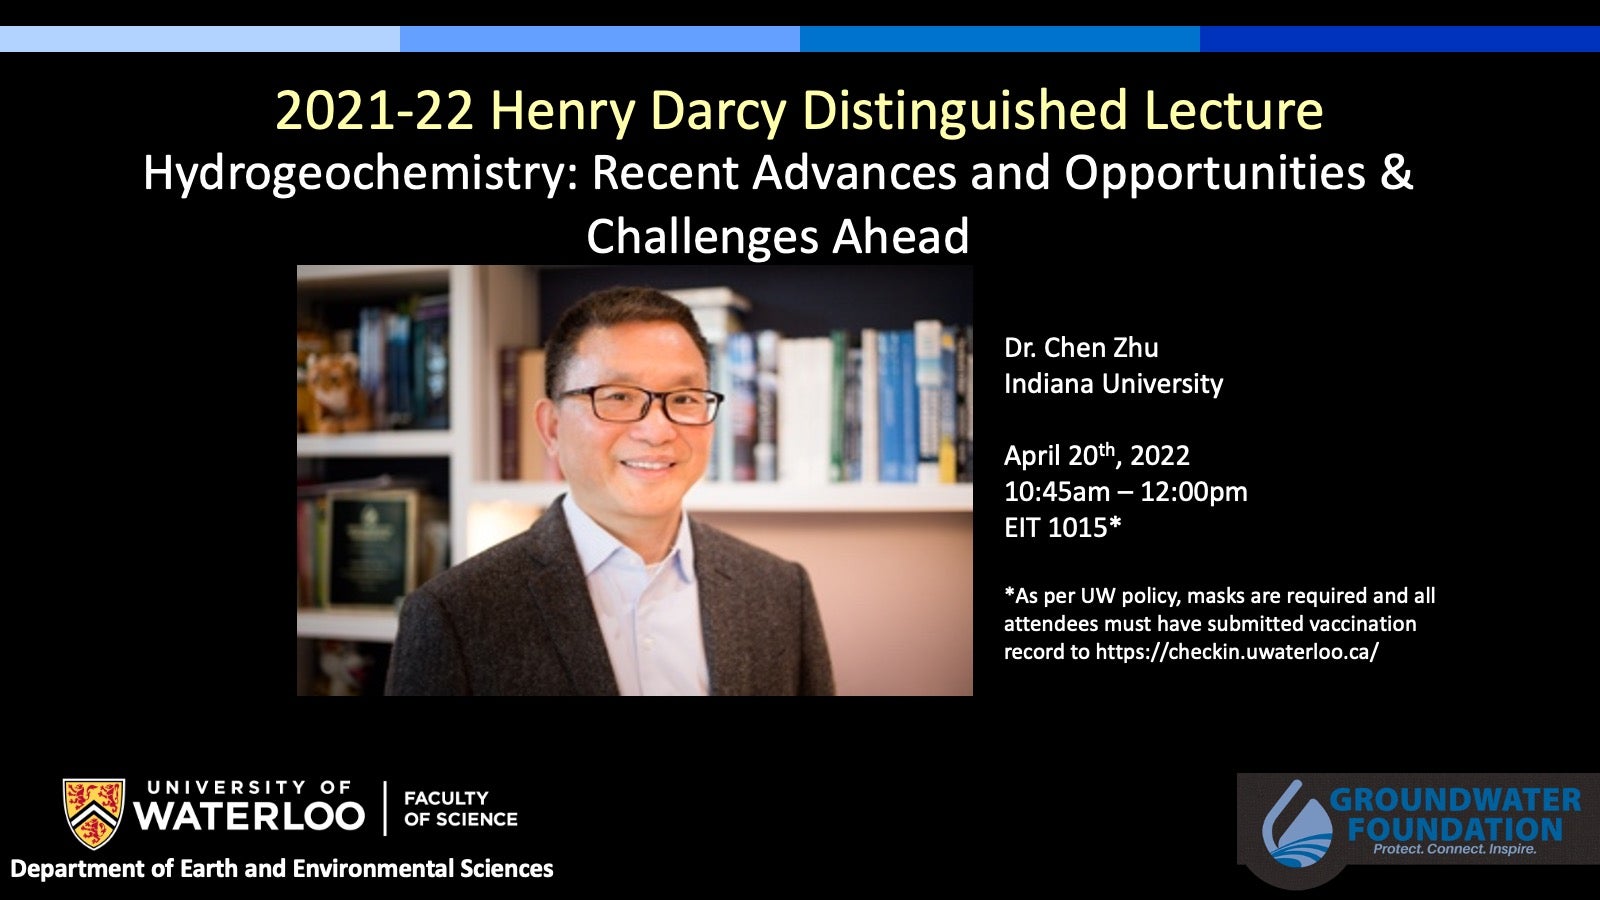 Henry Darcy Distinguished Lecture flyer